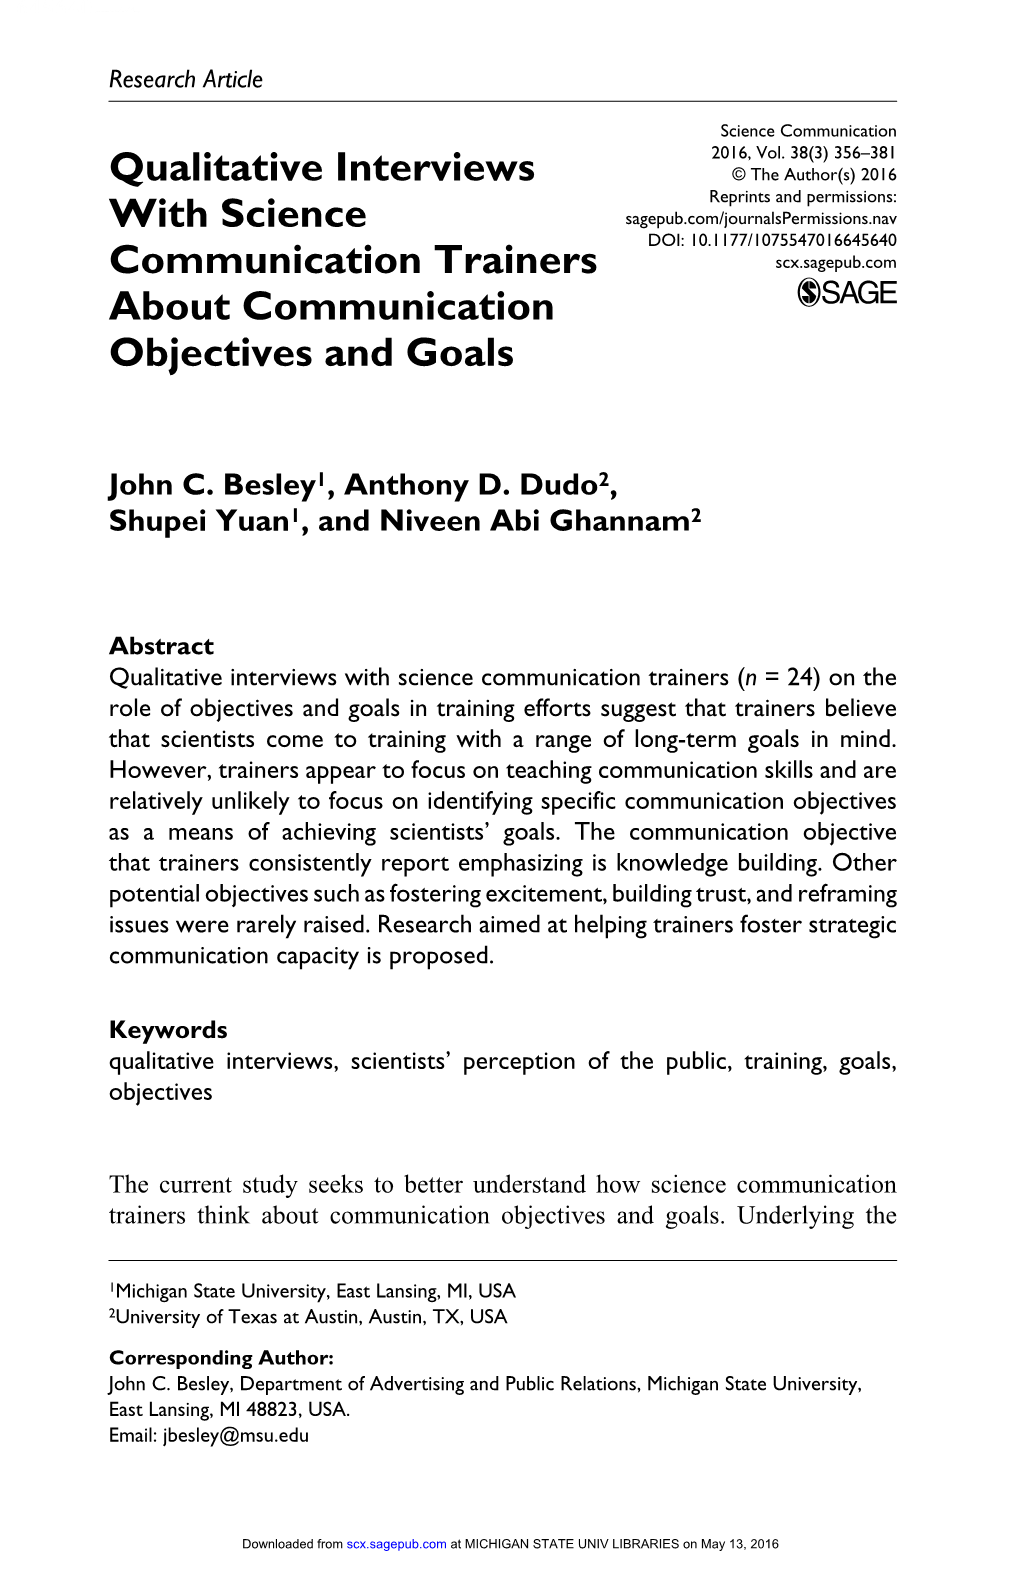 Qualitative Interviews with Science Communication Trainers About